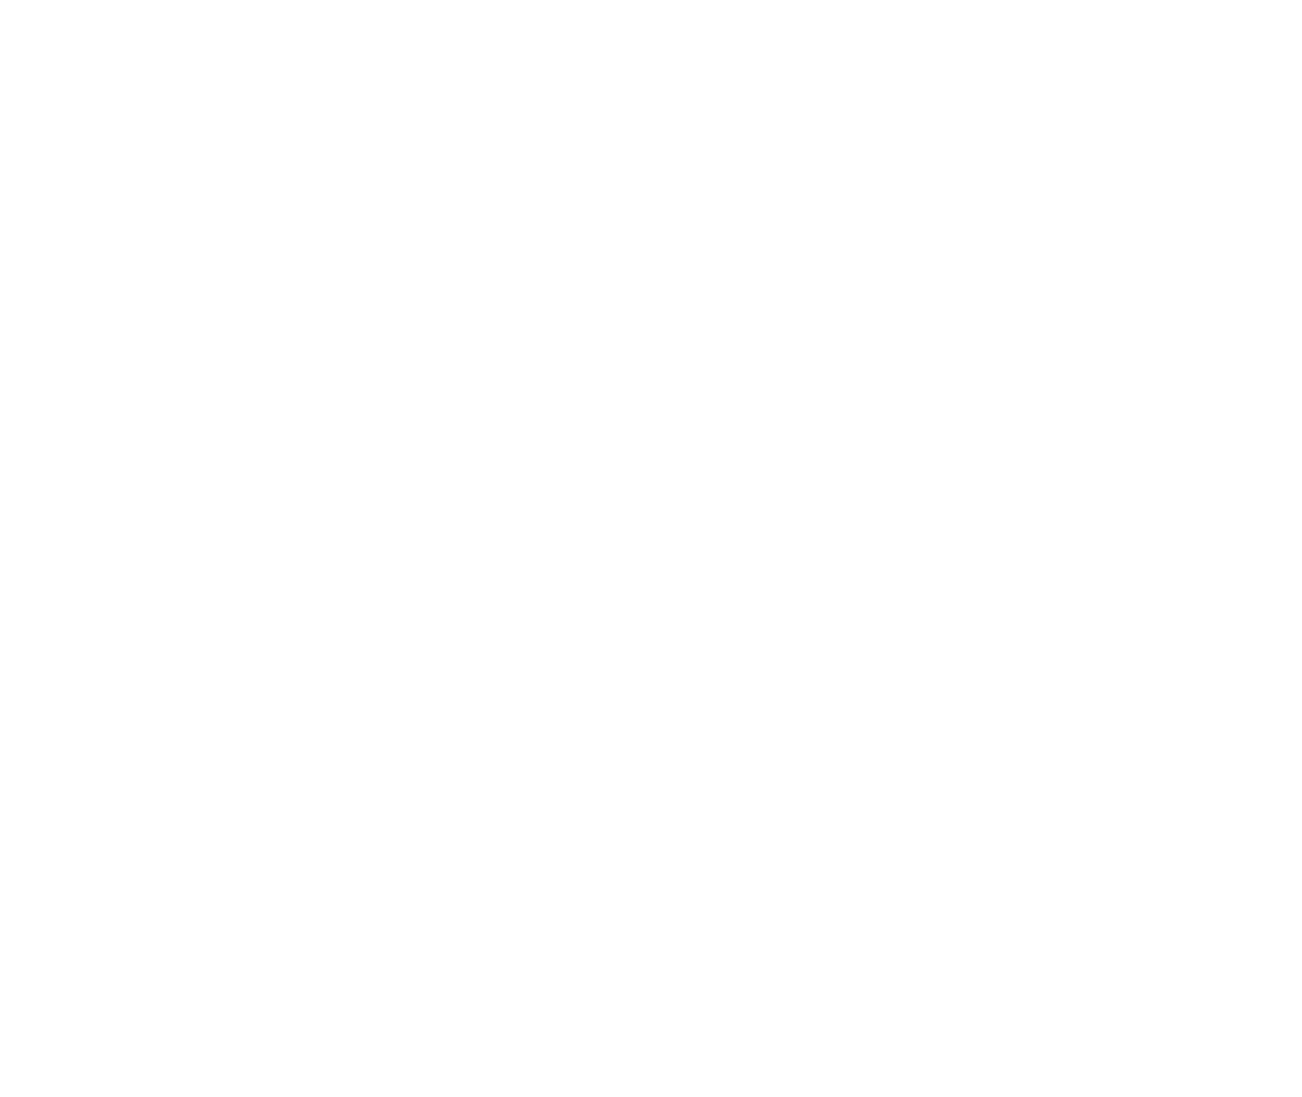 The school is alive, thriving and moving! At every turn there is something to tend to – garden beds, compost bins, wo...